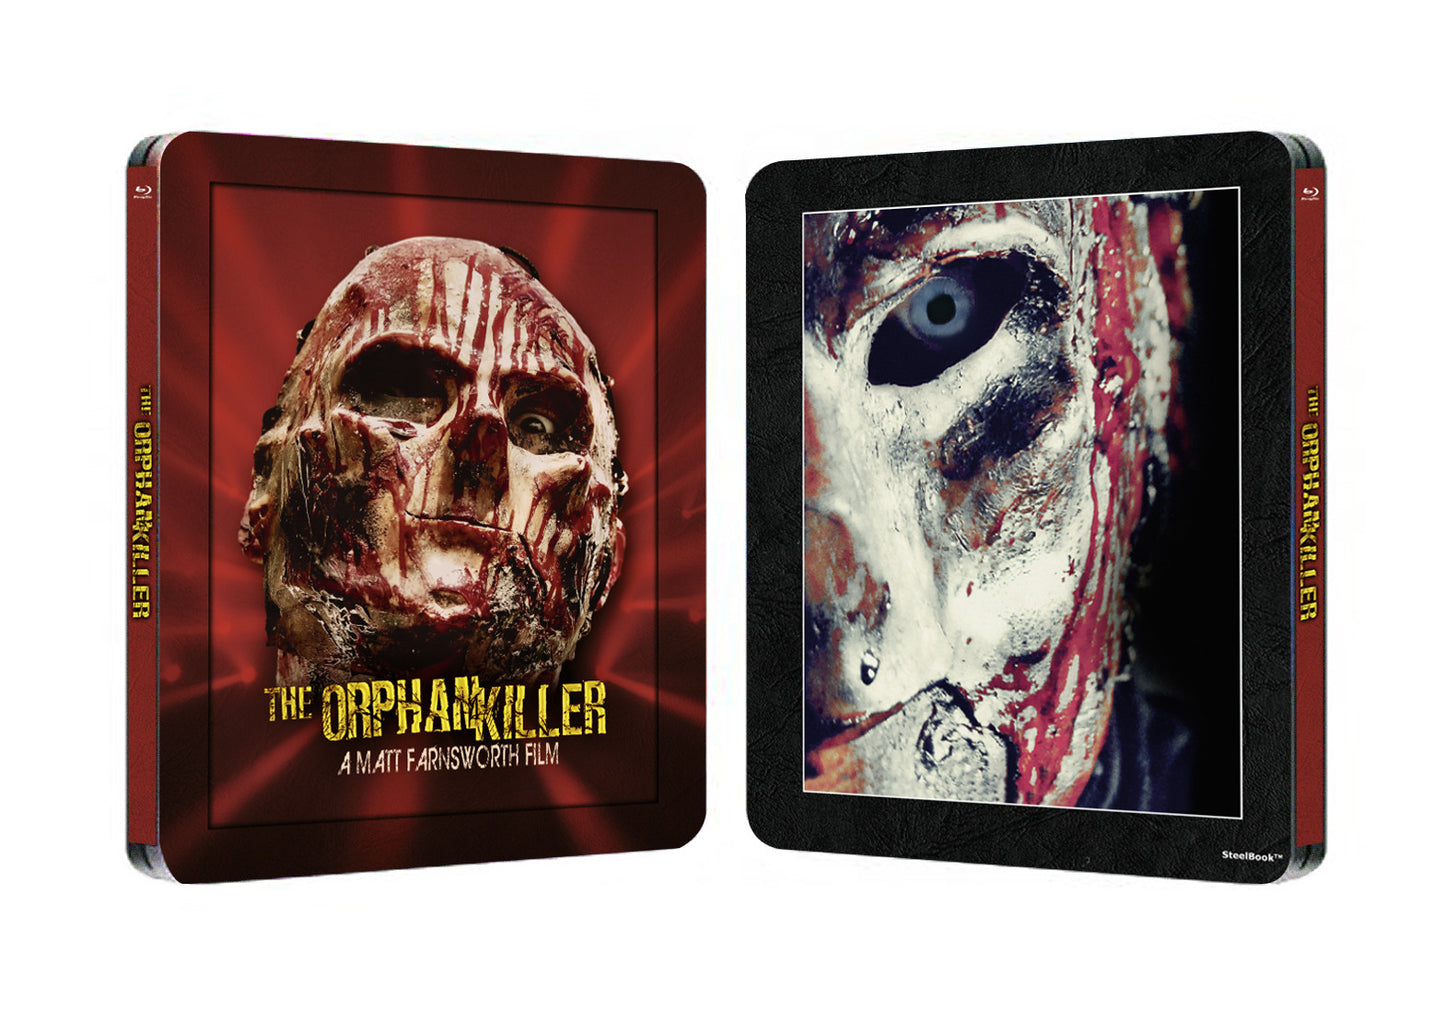 [The Orphan Killer] STEELBOOK BLURAY Autographed